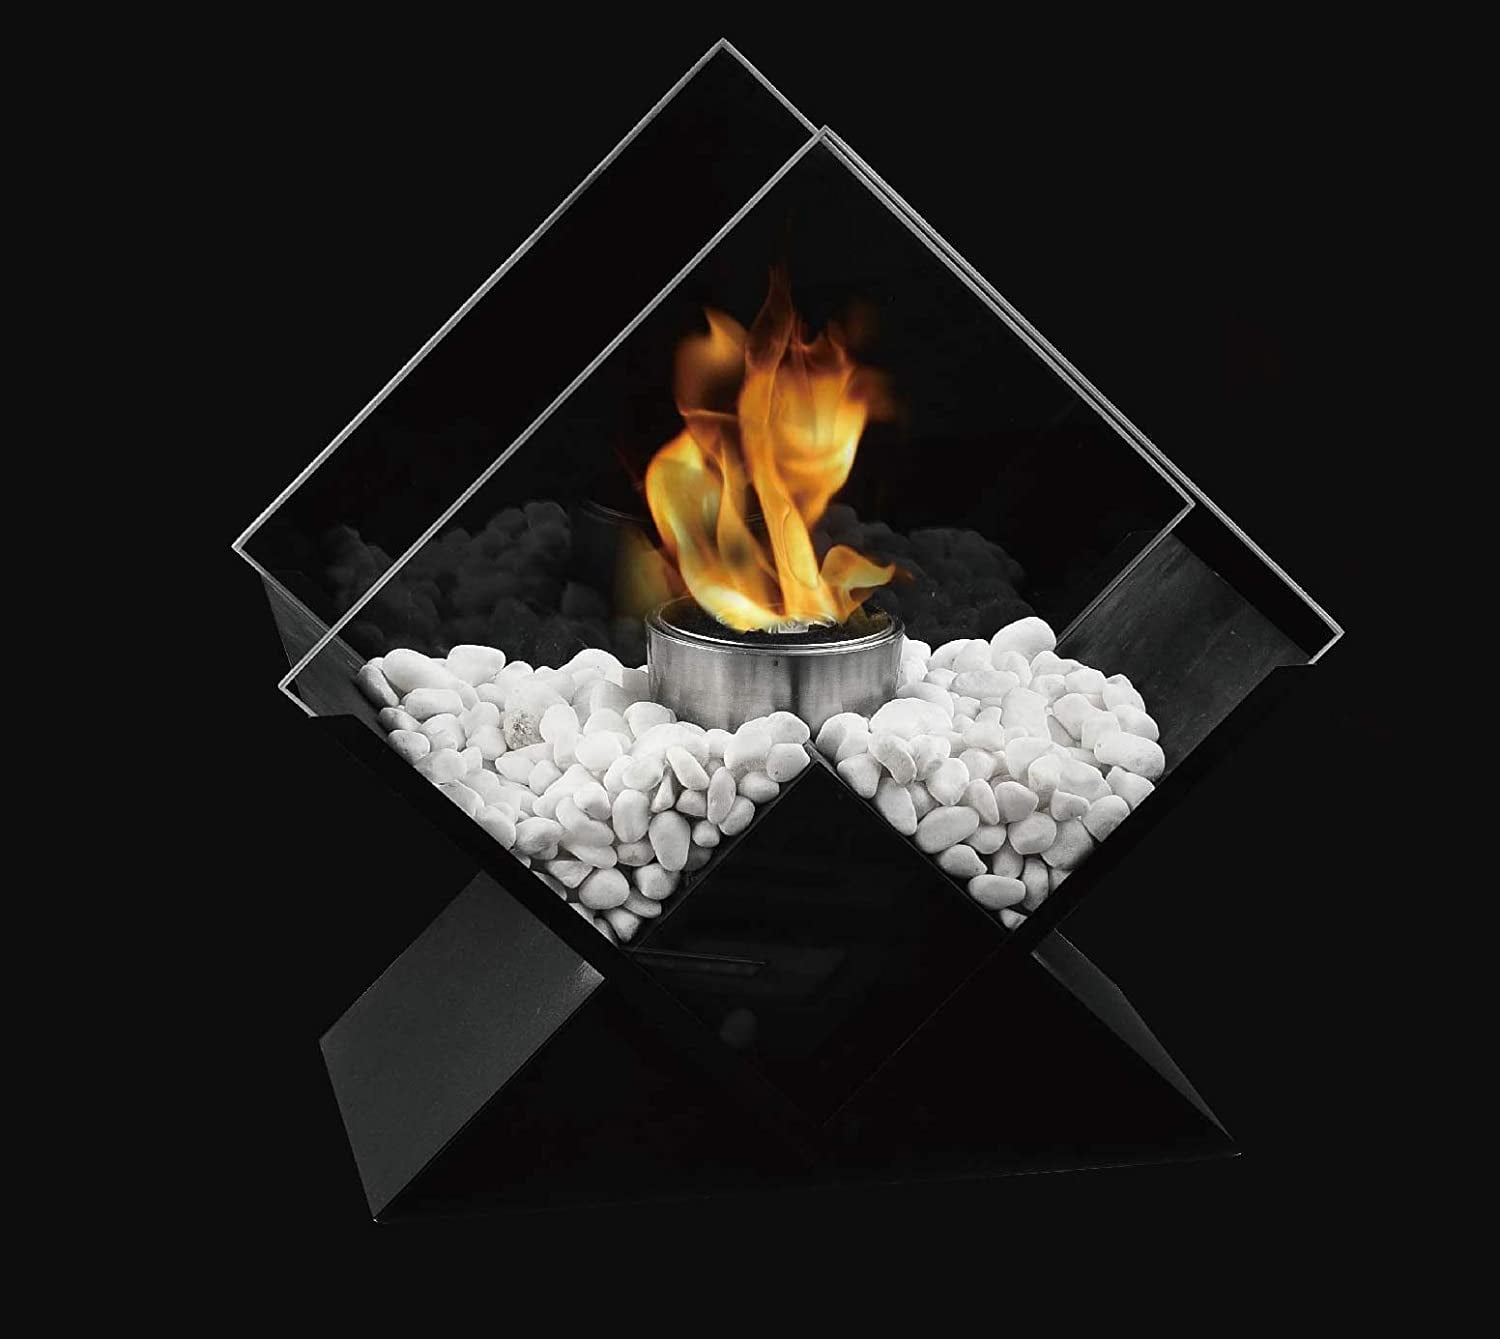 Clean-Burning Bio Ethanol Ventless Fireplace for Gift Indoor Outdoor Patio Parties Events Valentines Day JHY DESIGN Rectangular Tabletop Fire Bowl Pot Portable 35cm L Tabletop Fireplace